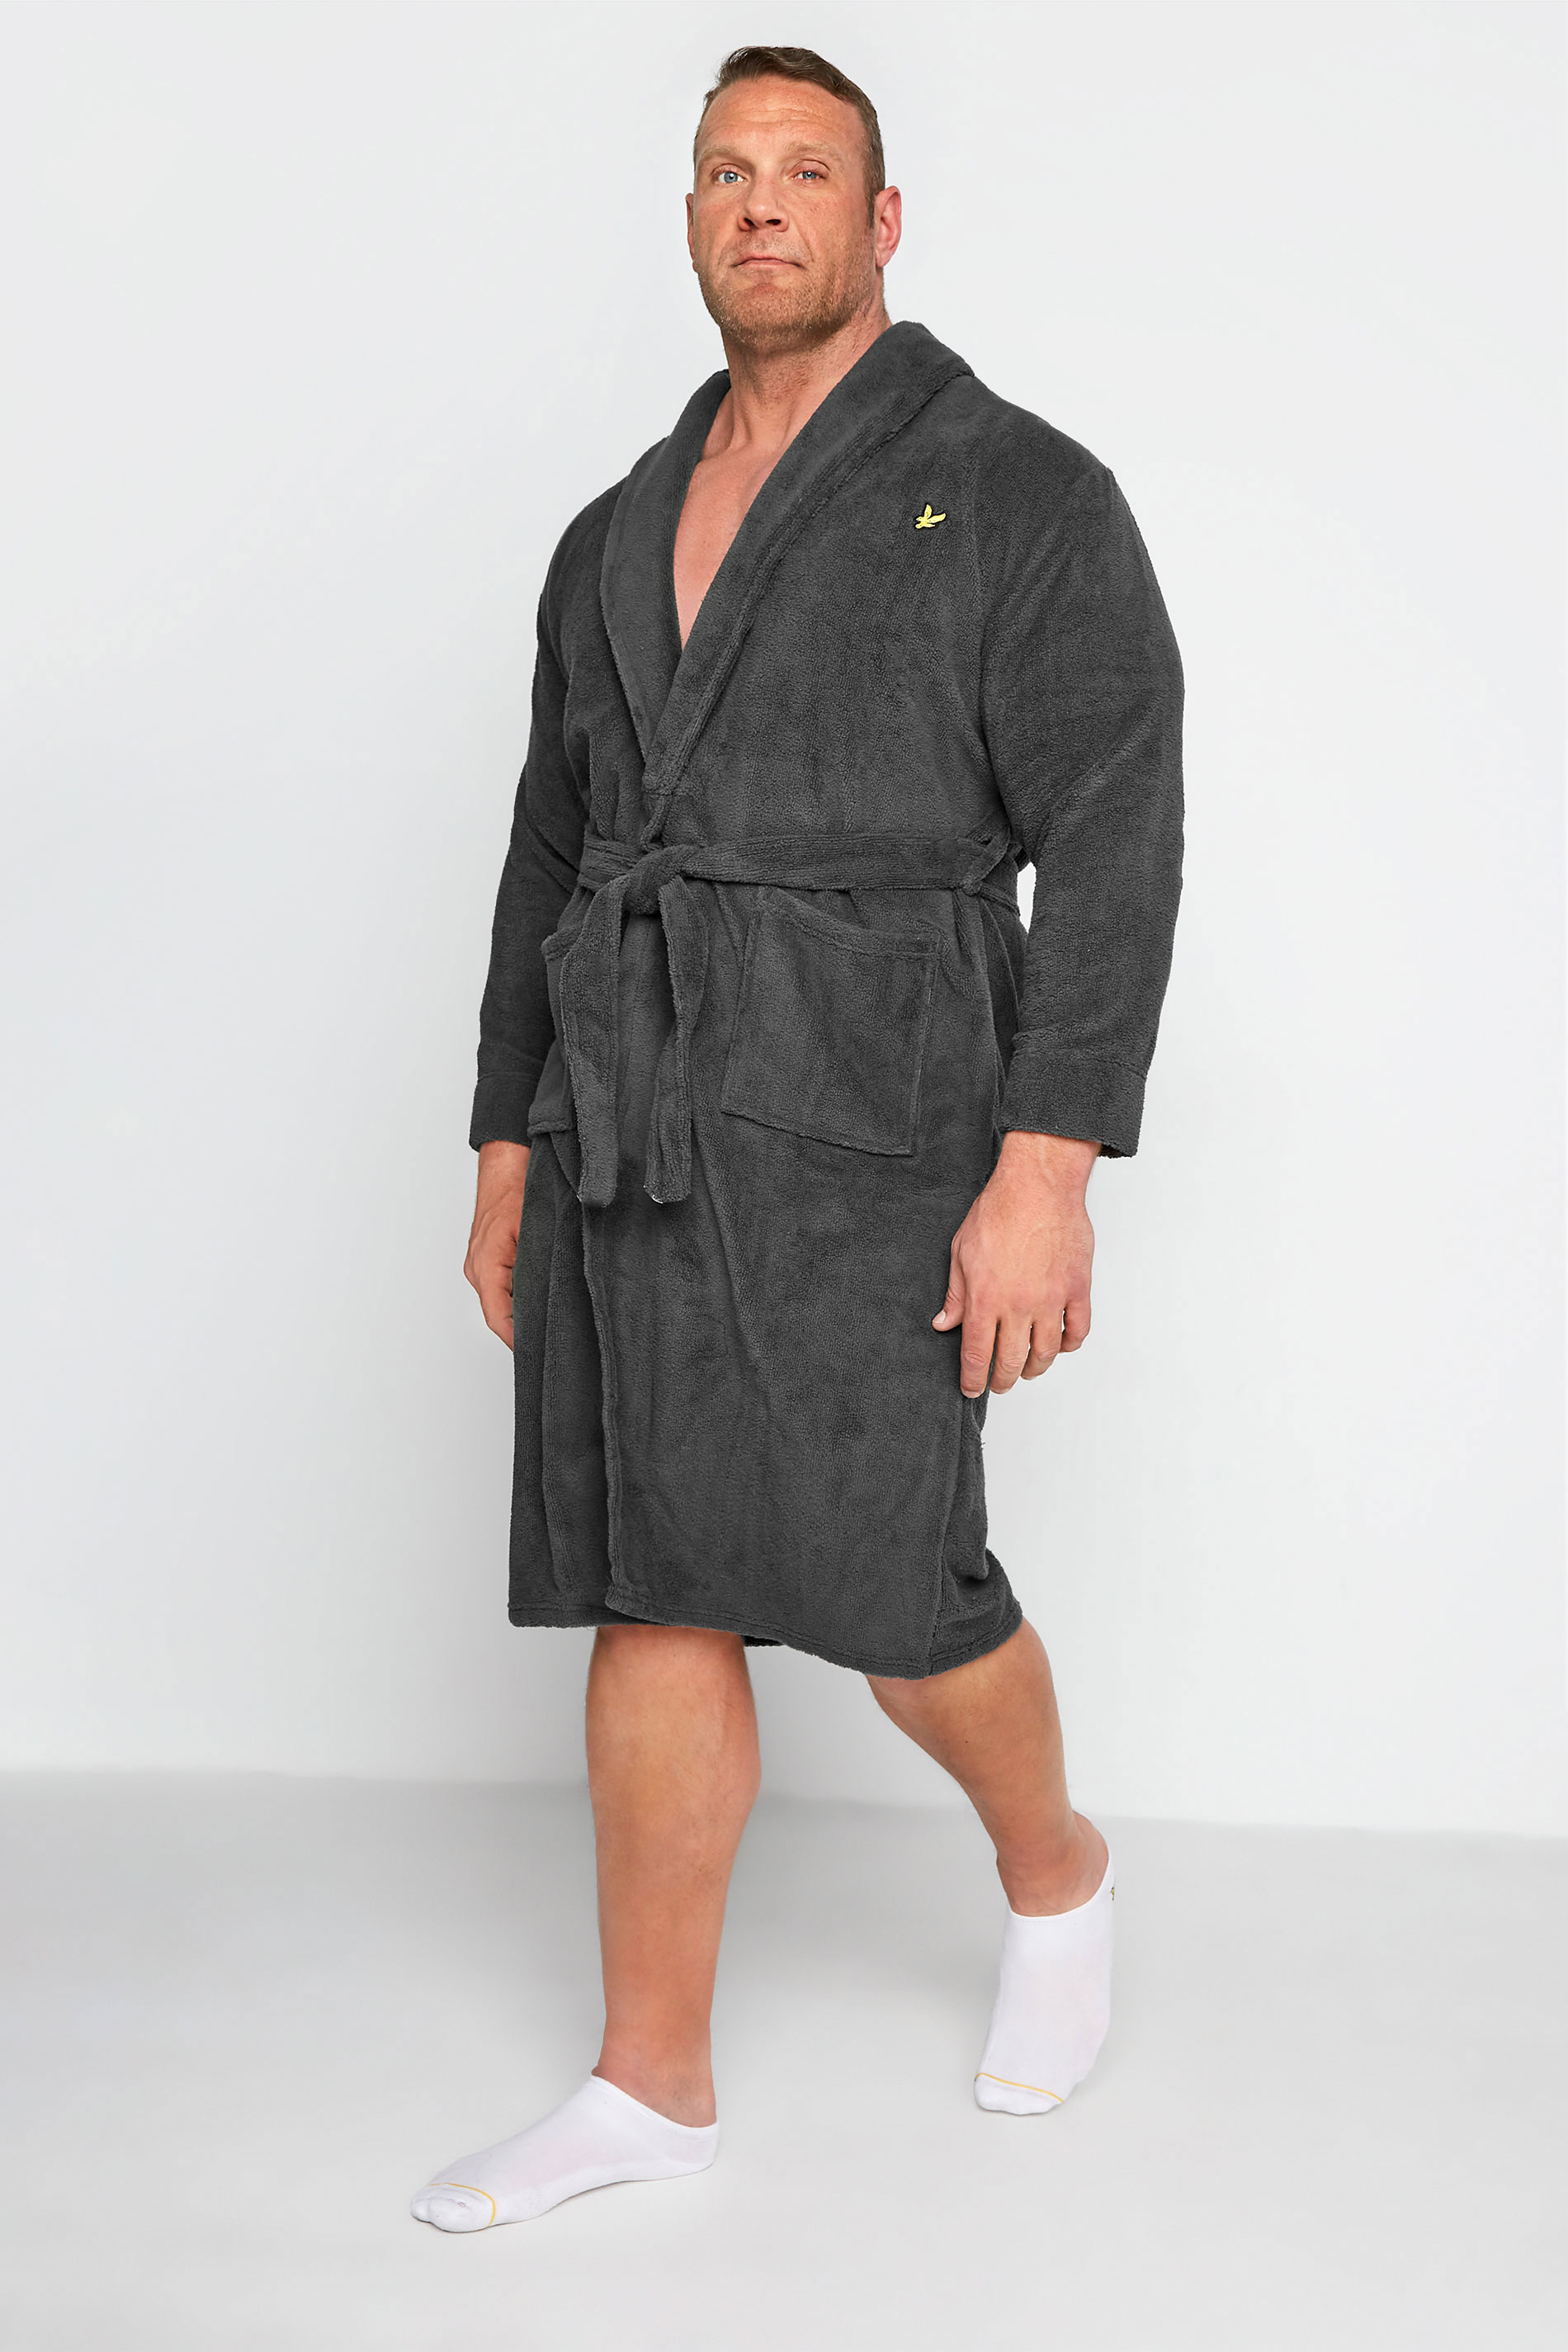 Image of Size 2Xl Mens Lyle & Scott Big & Tall Charcoal Grey Lucas Dressing Gown Big & Tall